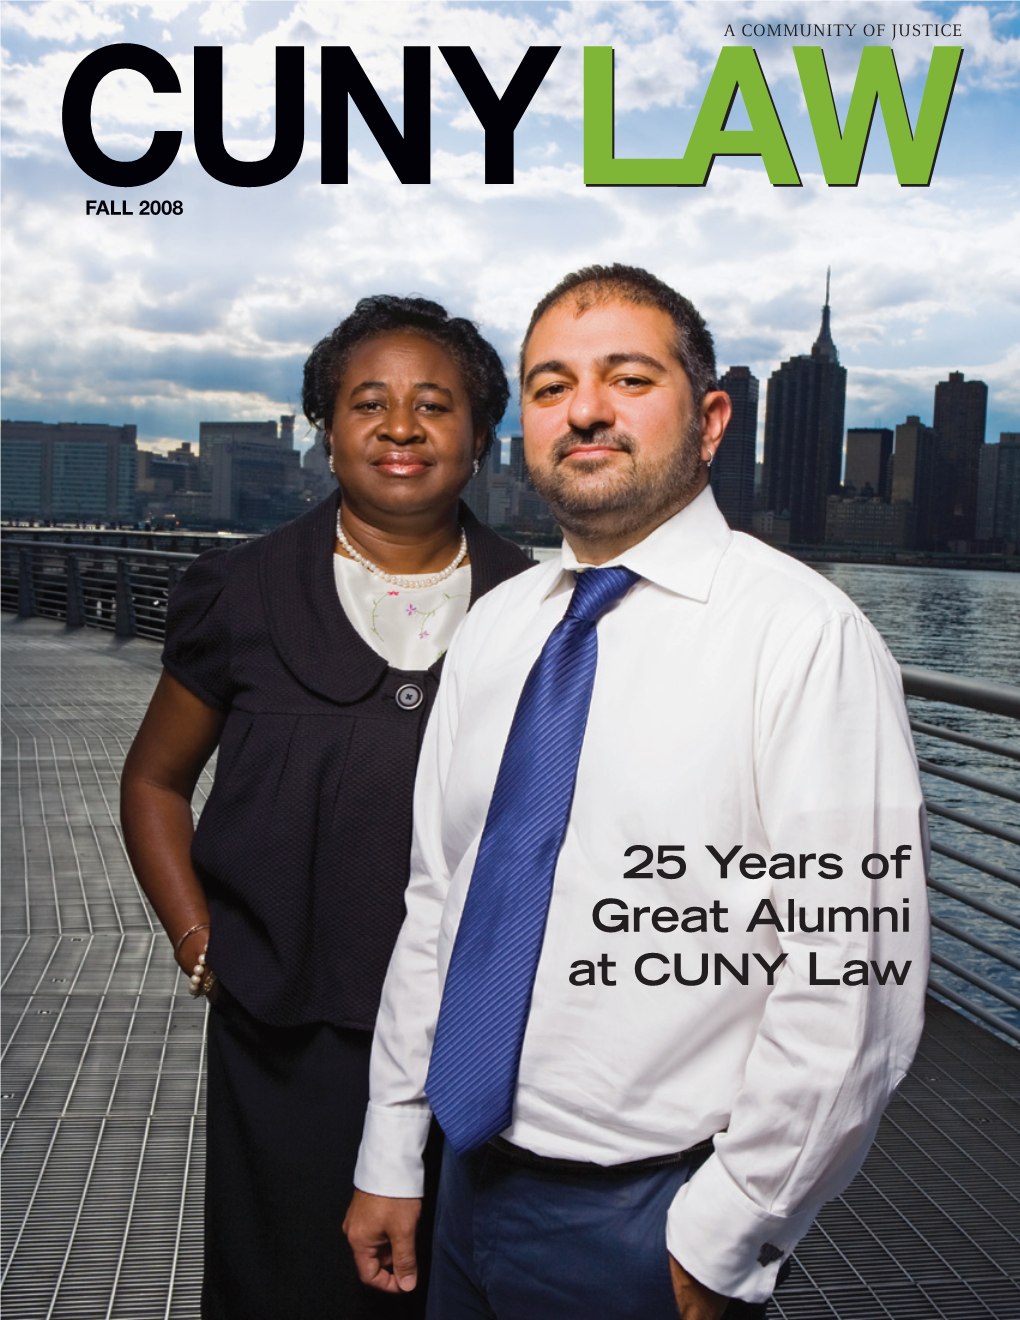 25 Years of Great Alumni at CUNY Law a COMMUNITY of JUSTICE Faces of the Bar FALL2 2008 011